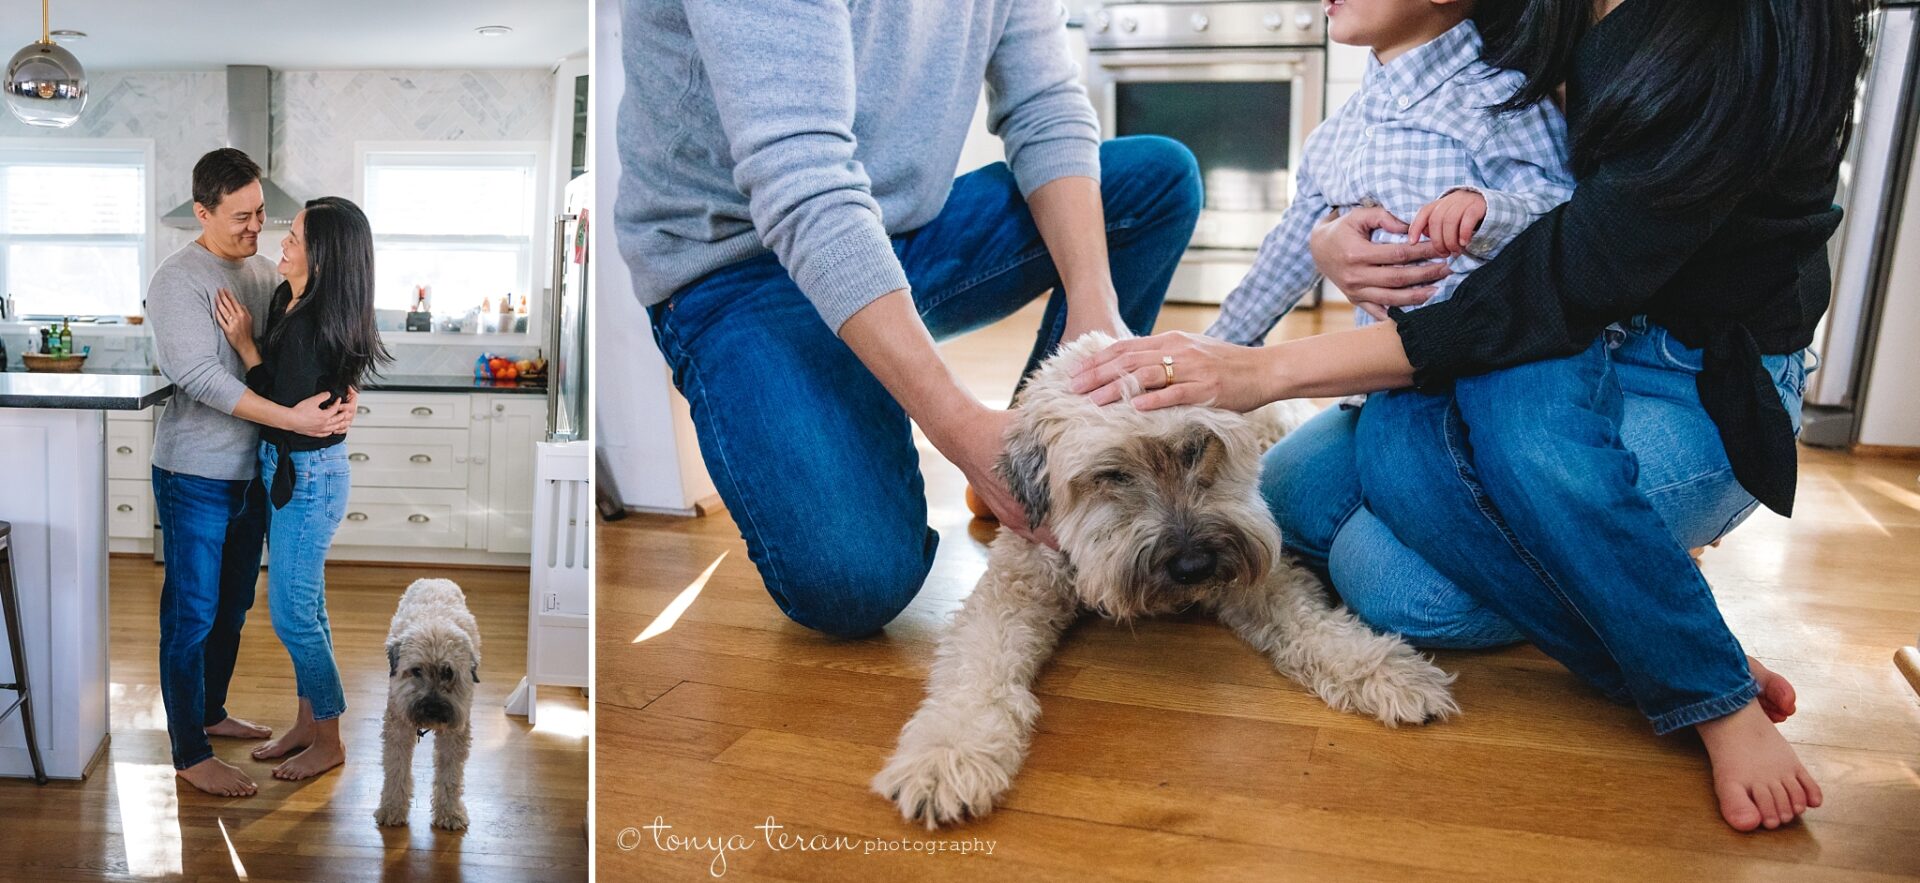 in-home family photo session in washington, dc - dc in-home lifestyle photographer